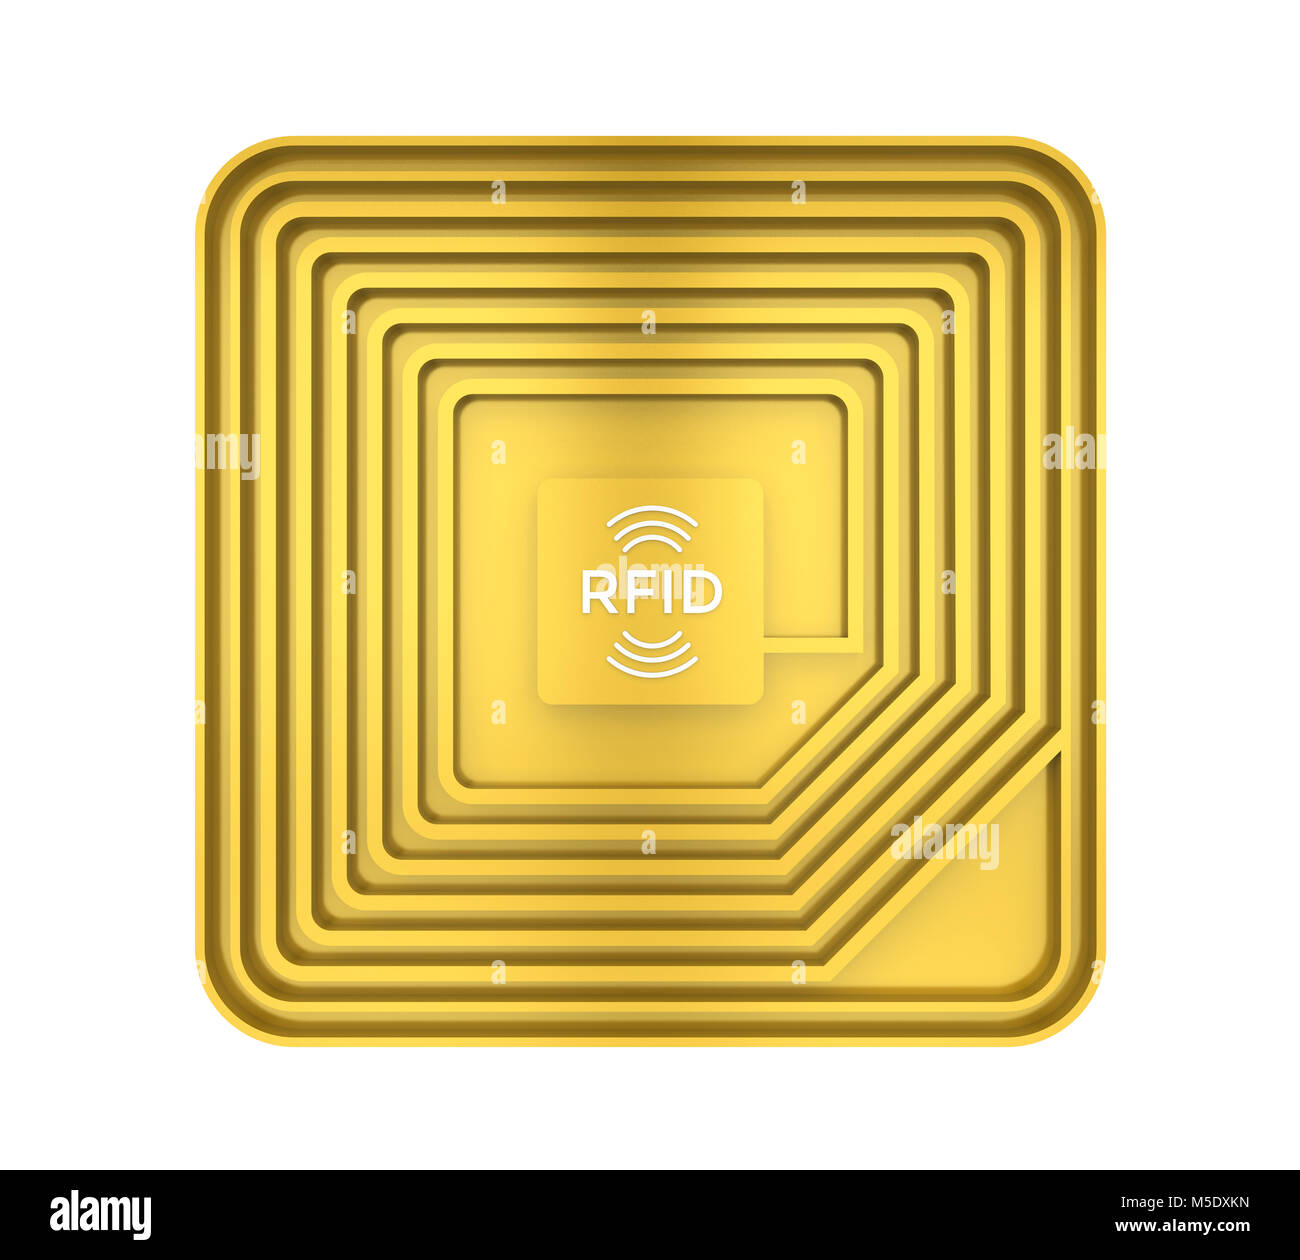 Radio frequency identification tag photography and images - Alamy